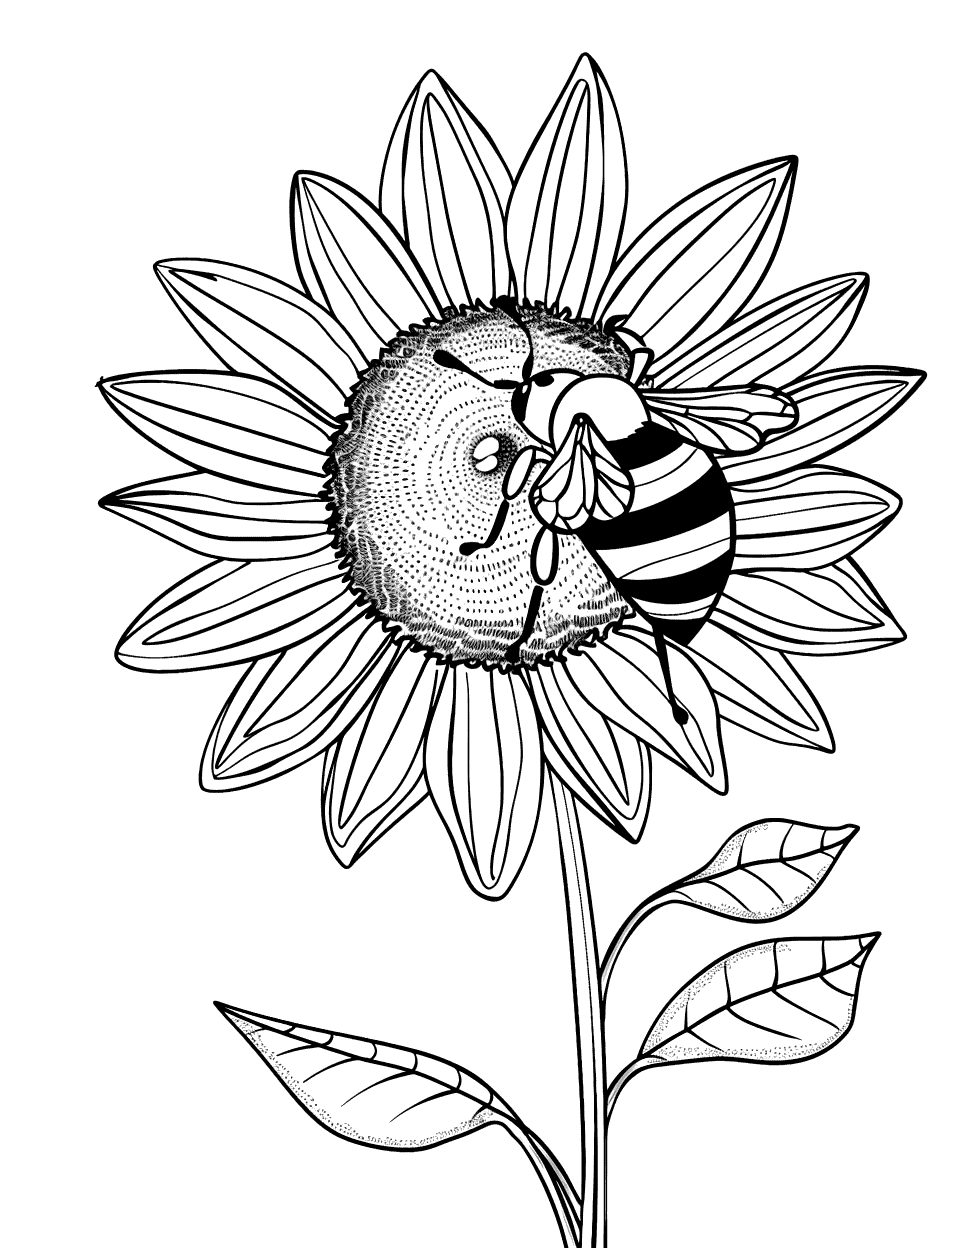 Bee on a Sunflower Coloring Page - A bee collecting nectar from a large vibrant sunflower.